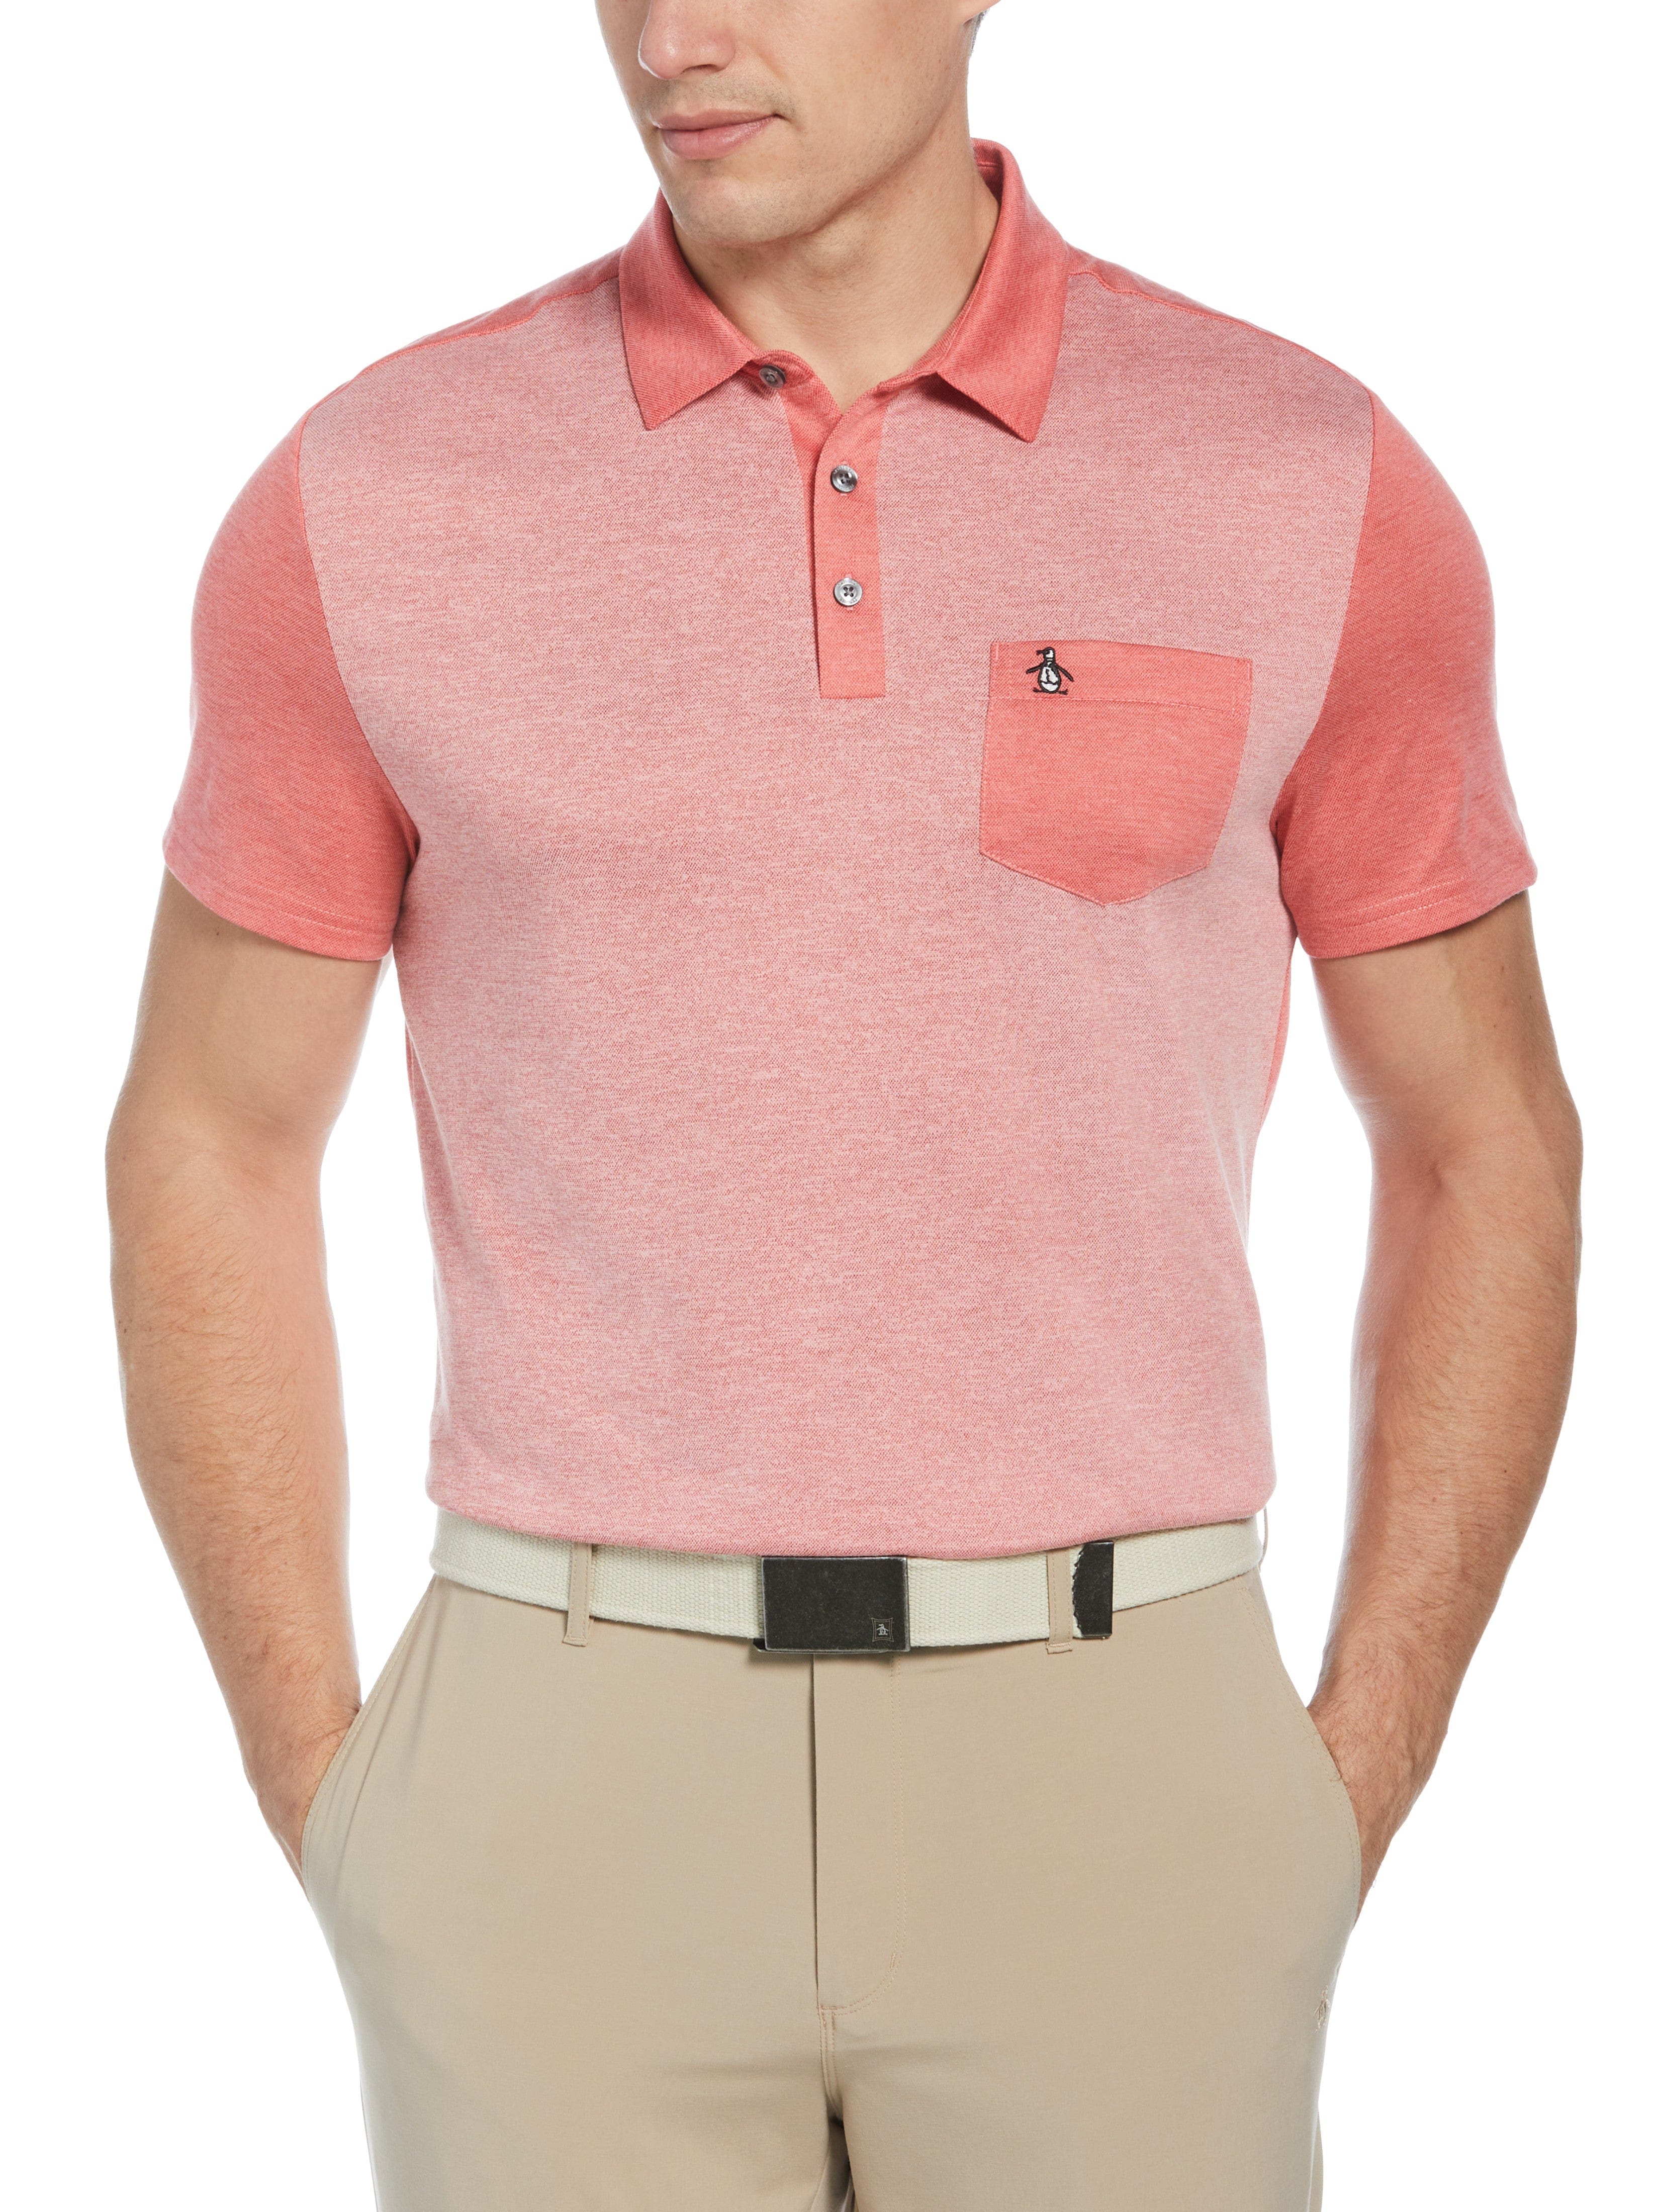 Original Penguin Mens Color Block Golf Polo Shirt, Size Small, Bittersweet Red, Polyester/Recycled Polyester/Cotton | Golf Apparel Shop